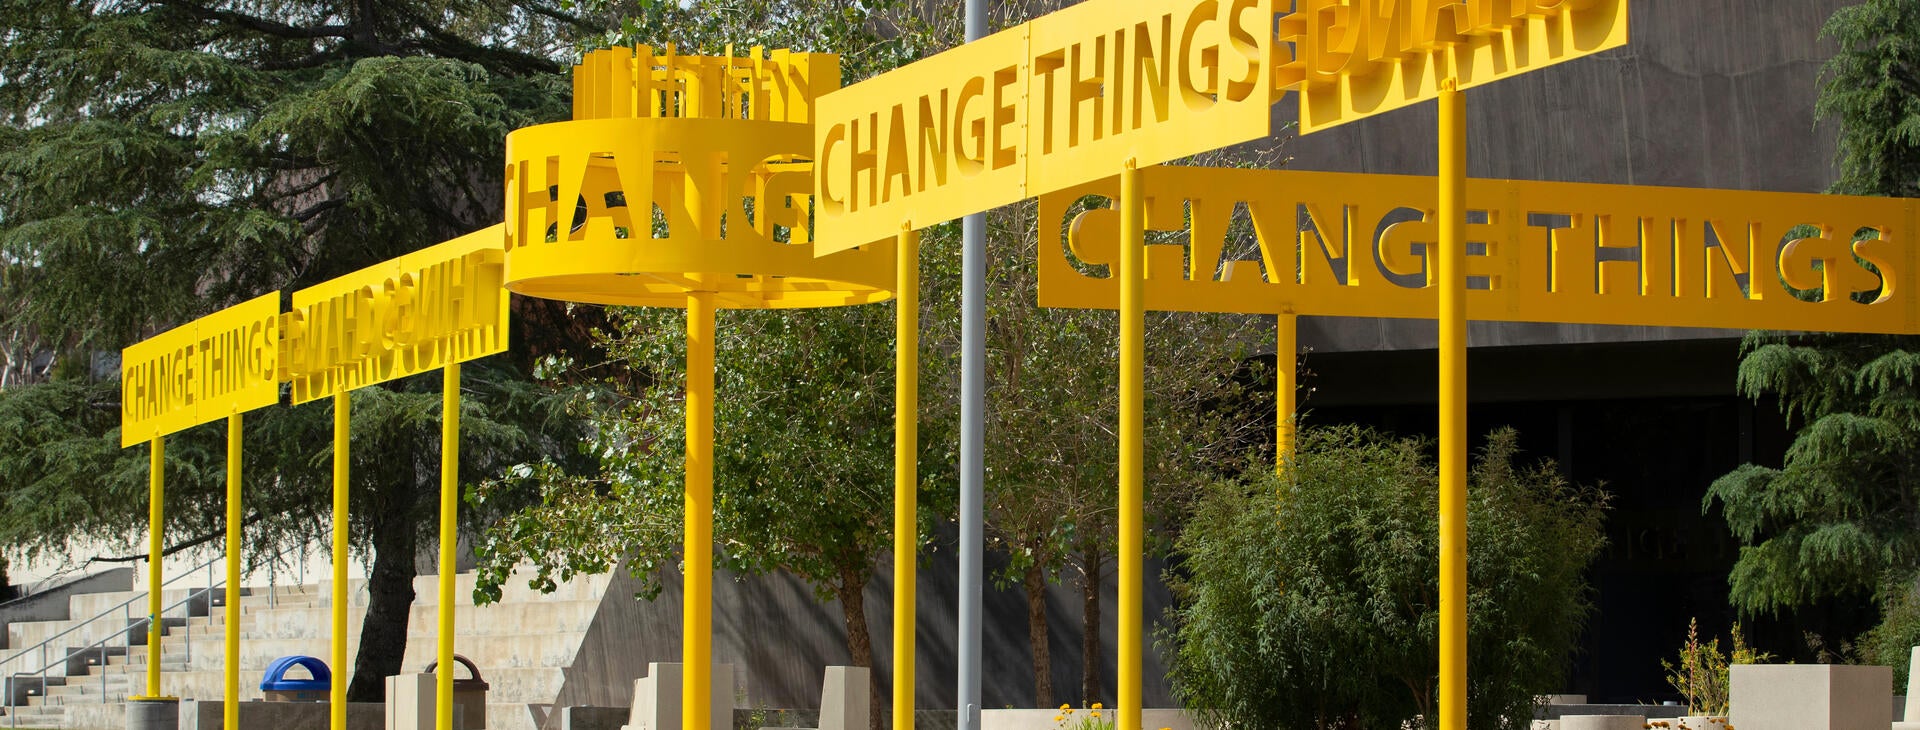 Change Things Sign